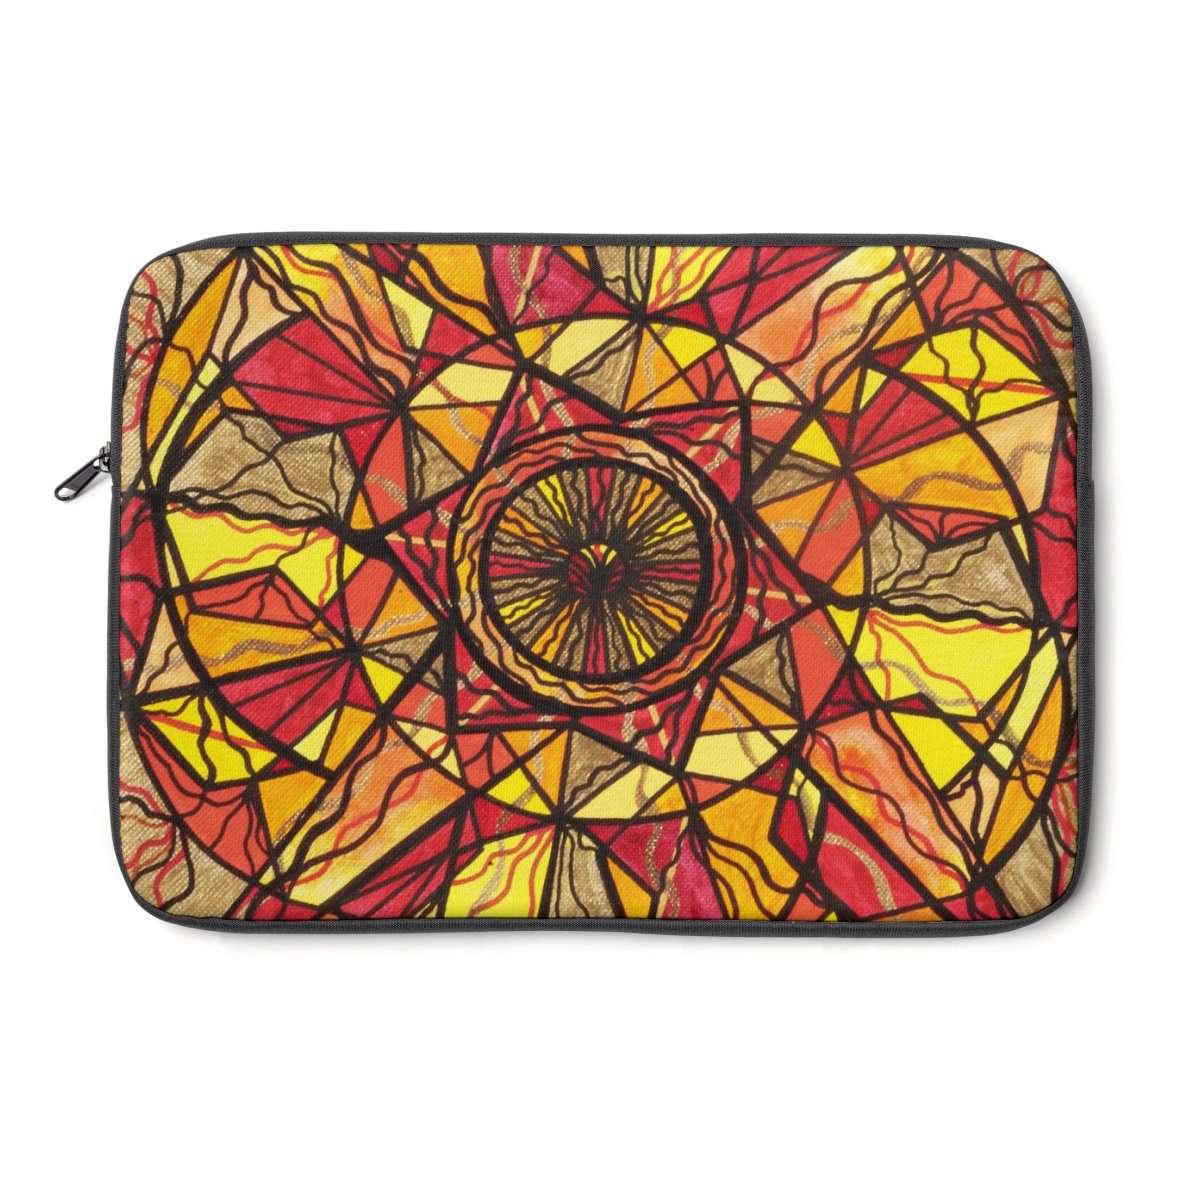 shop-without-worry-for-empowerment-laptop-sleeve-online-hot-sale_0.jpg